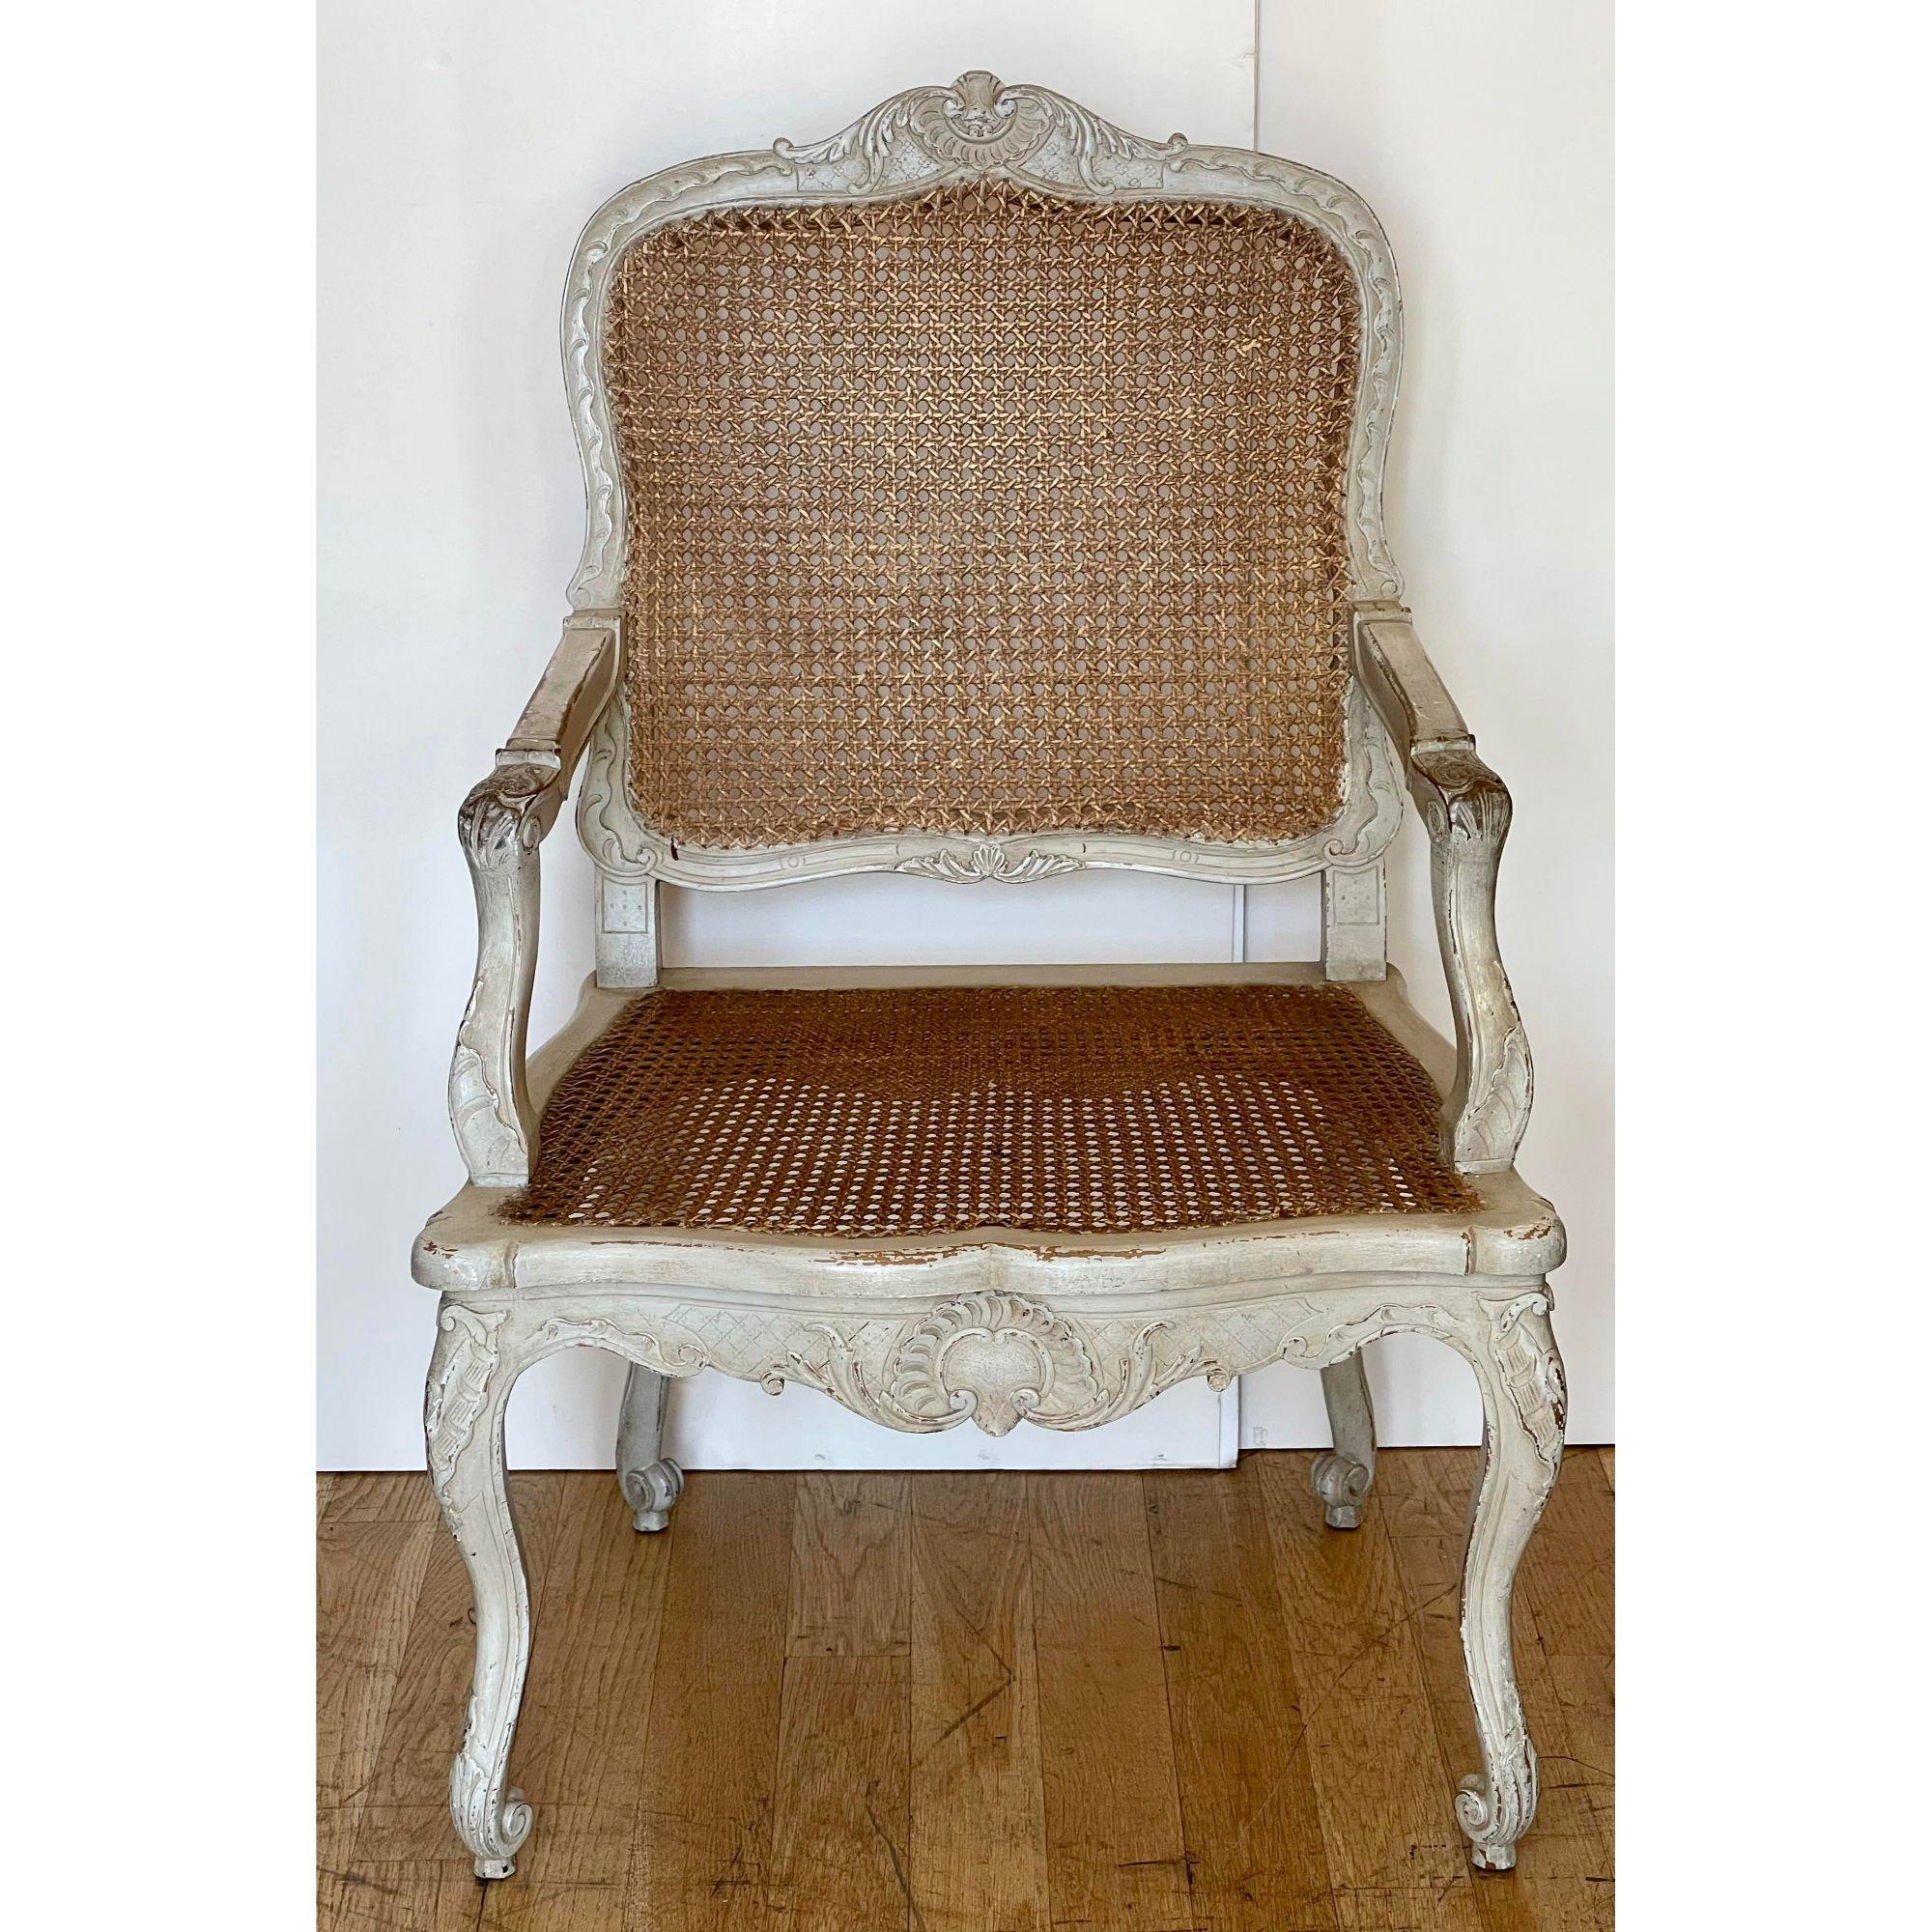 Antique Gustavian style Louis XV arm chair

Additional information: 
Materials: Wood
Color: Greige
Period: 19th century
Styles: Gustavian (Swedish), Louis XV
Number of seats: 1
Item type: Vintage, Antique or Pre-owned
Dimensions: 25.5